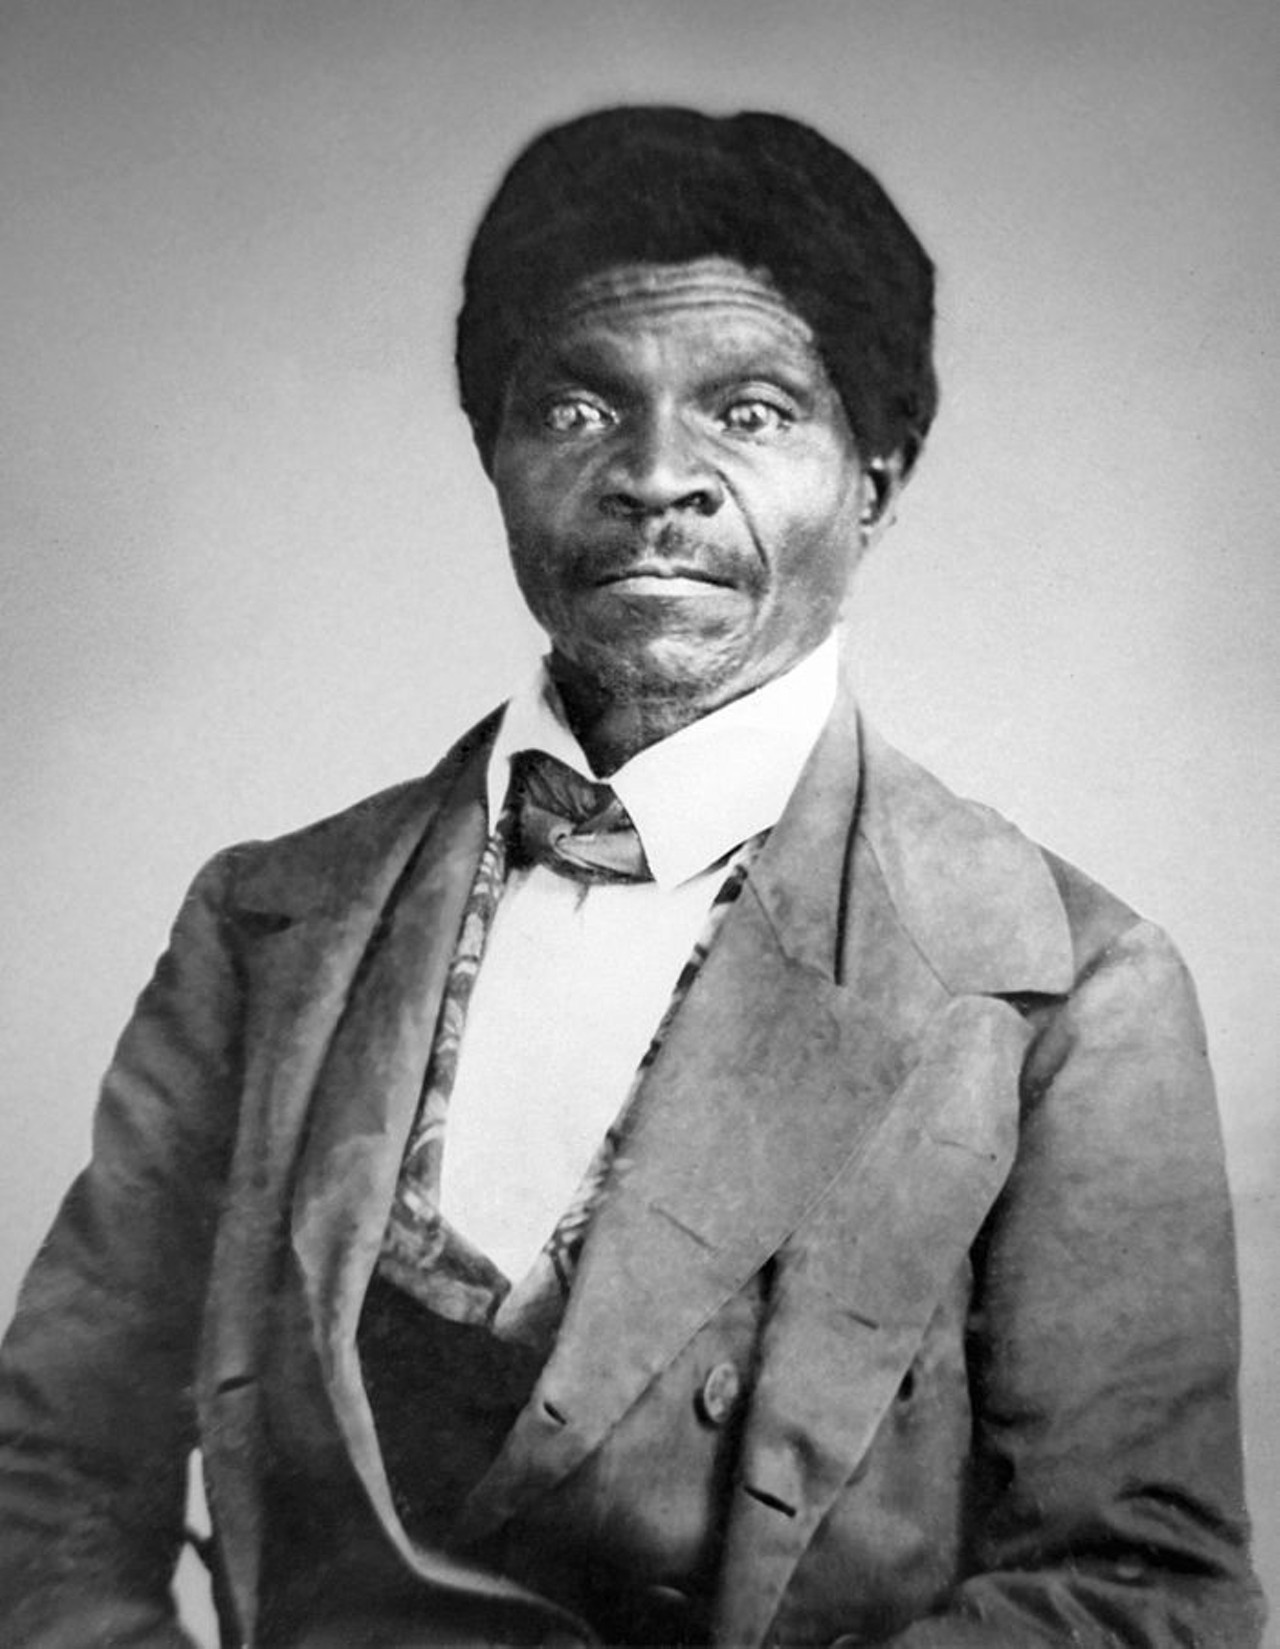 Dred Scott
This St. Louis hero was an enslaved black man who sued for his freedom and is now buried in Calvary Cemetery where gravesite visitors place pennies on his grave  &#151; generally considered a reference to our Abraham Lincoln's and the abolitionist movement.
Photo credit: Wikimedia Commons